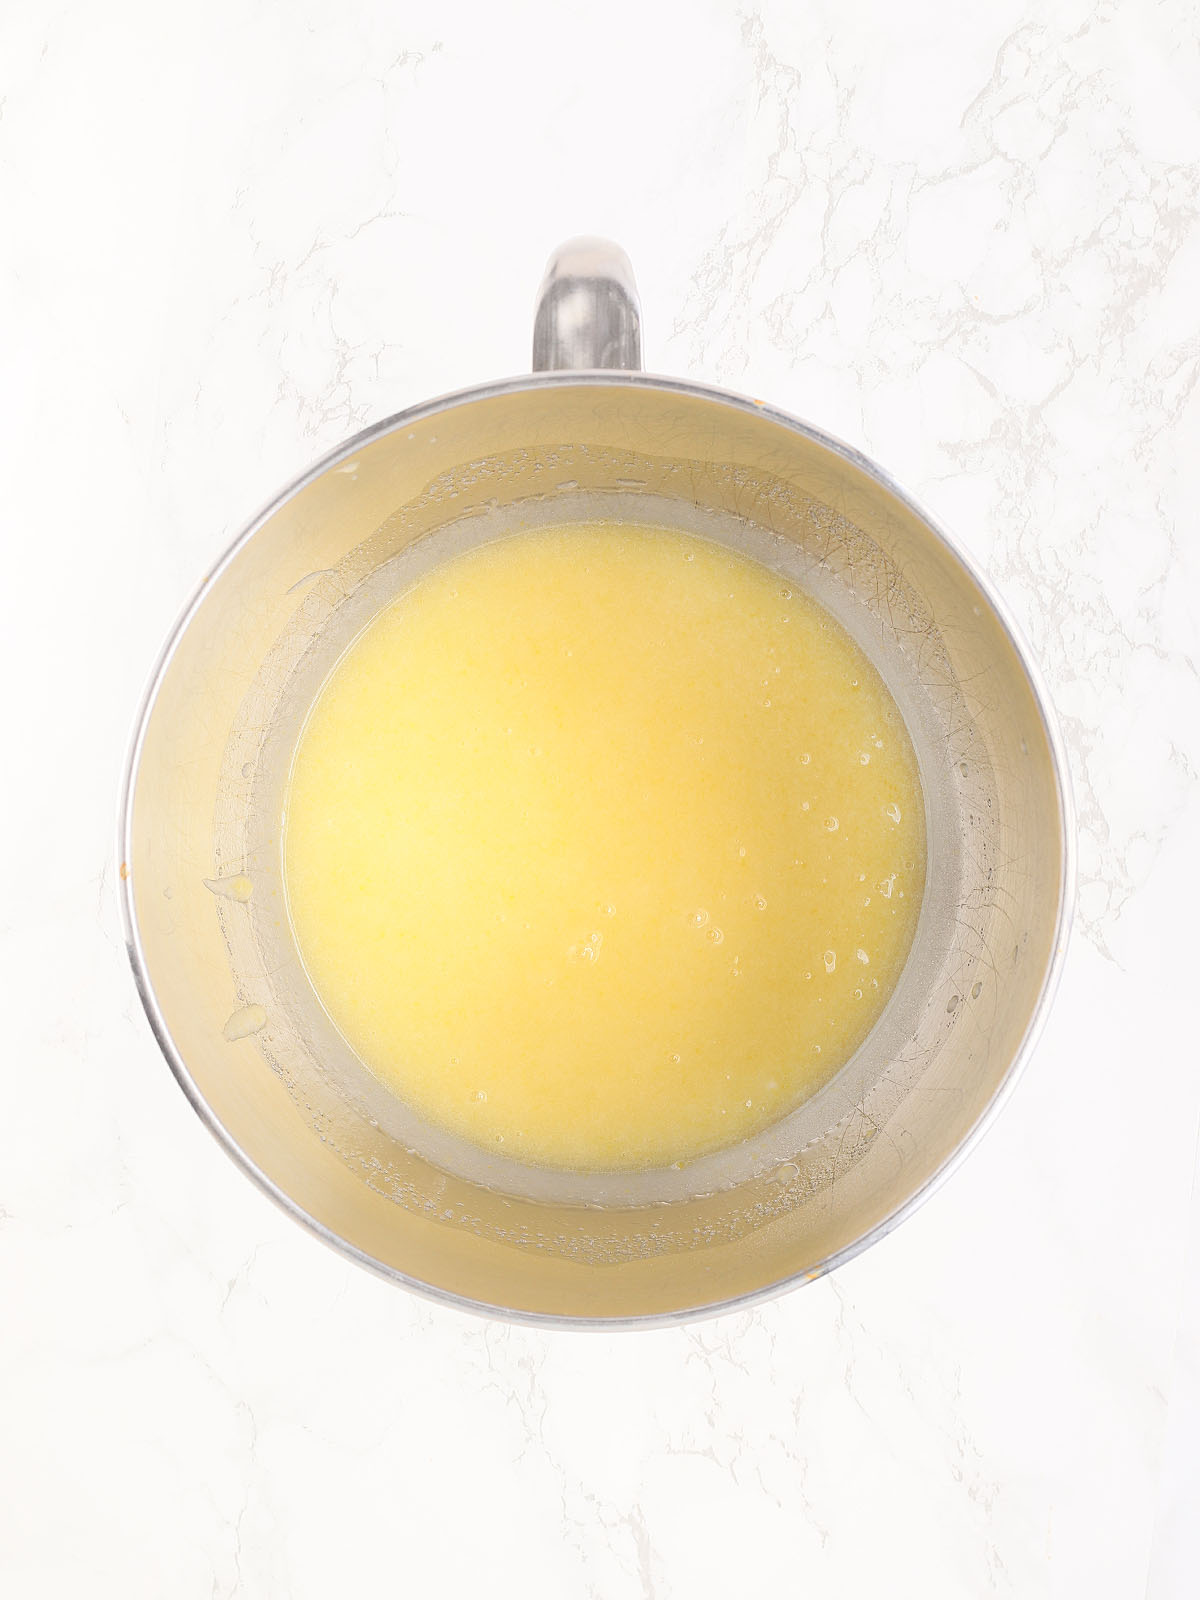 eggs, oil and sugar mixed together in a metal mixing bowl